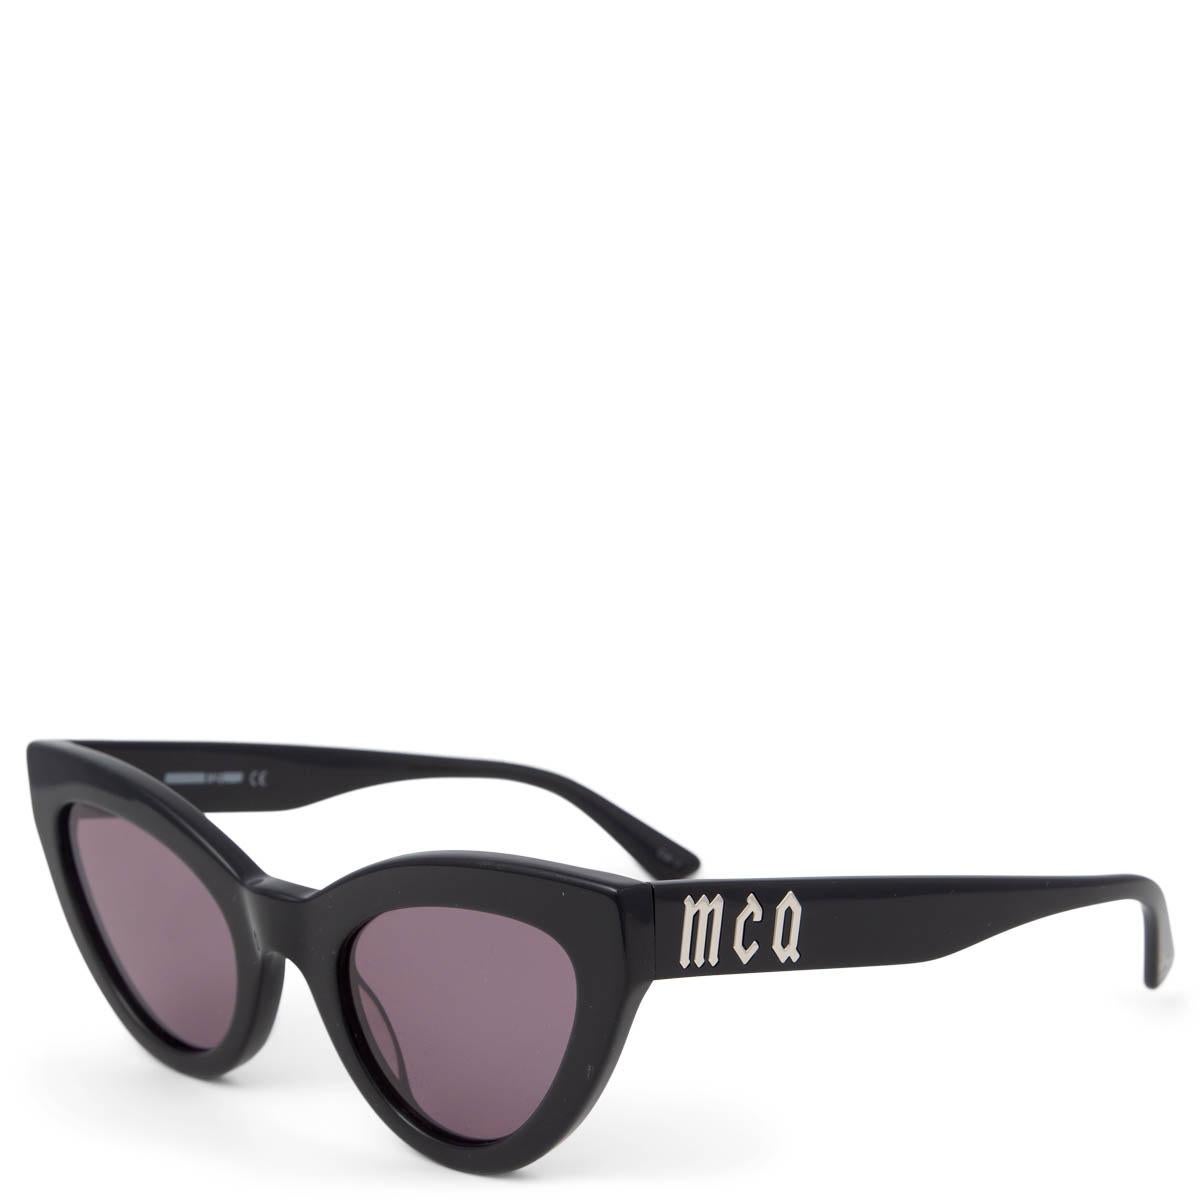 100% authentic Alexander McQueen MQ152S cat-eye sunglasses in black acetate. The sunglasses show some faint scratches on the lenses and on the frame. Overall in good condition. Come with case. 

Measurements
Model	MQ152S
Width	14cm